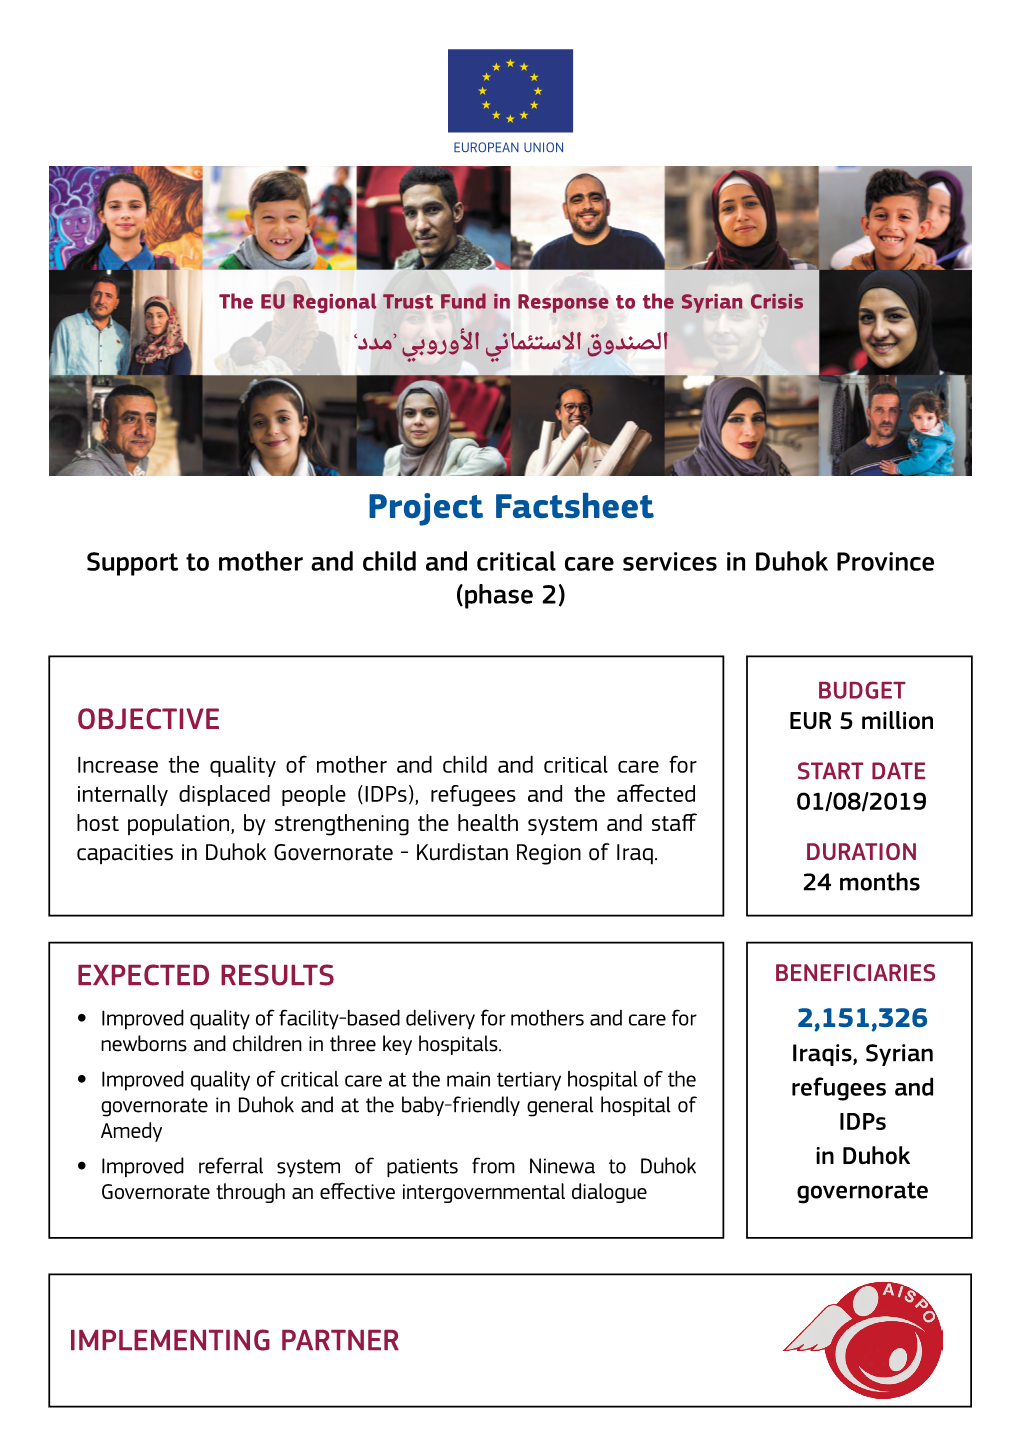 Project Factsheet Support to Mother and Child and Critical Care Services in Duhok Province (Phase 2)